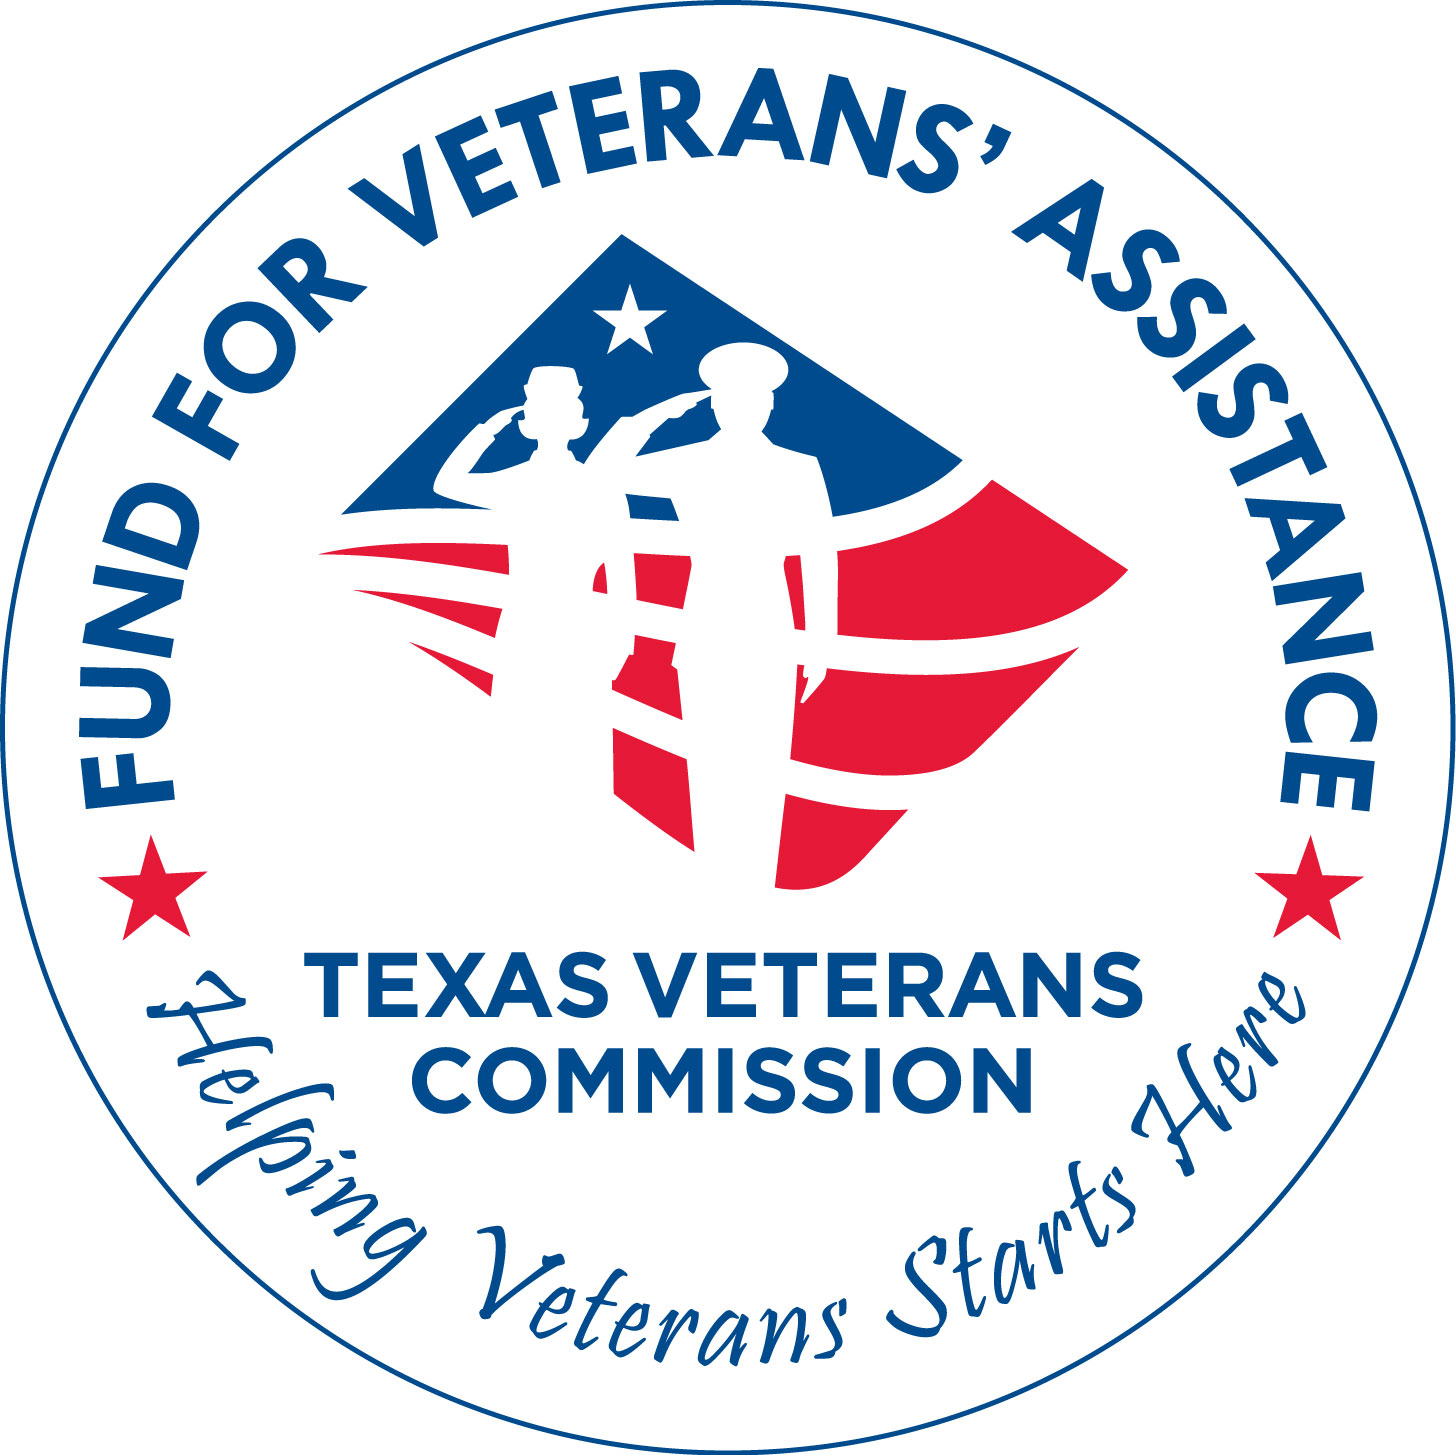 Fund for Veterans’ Assistance